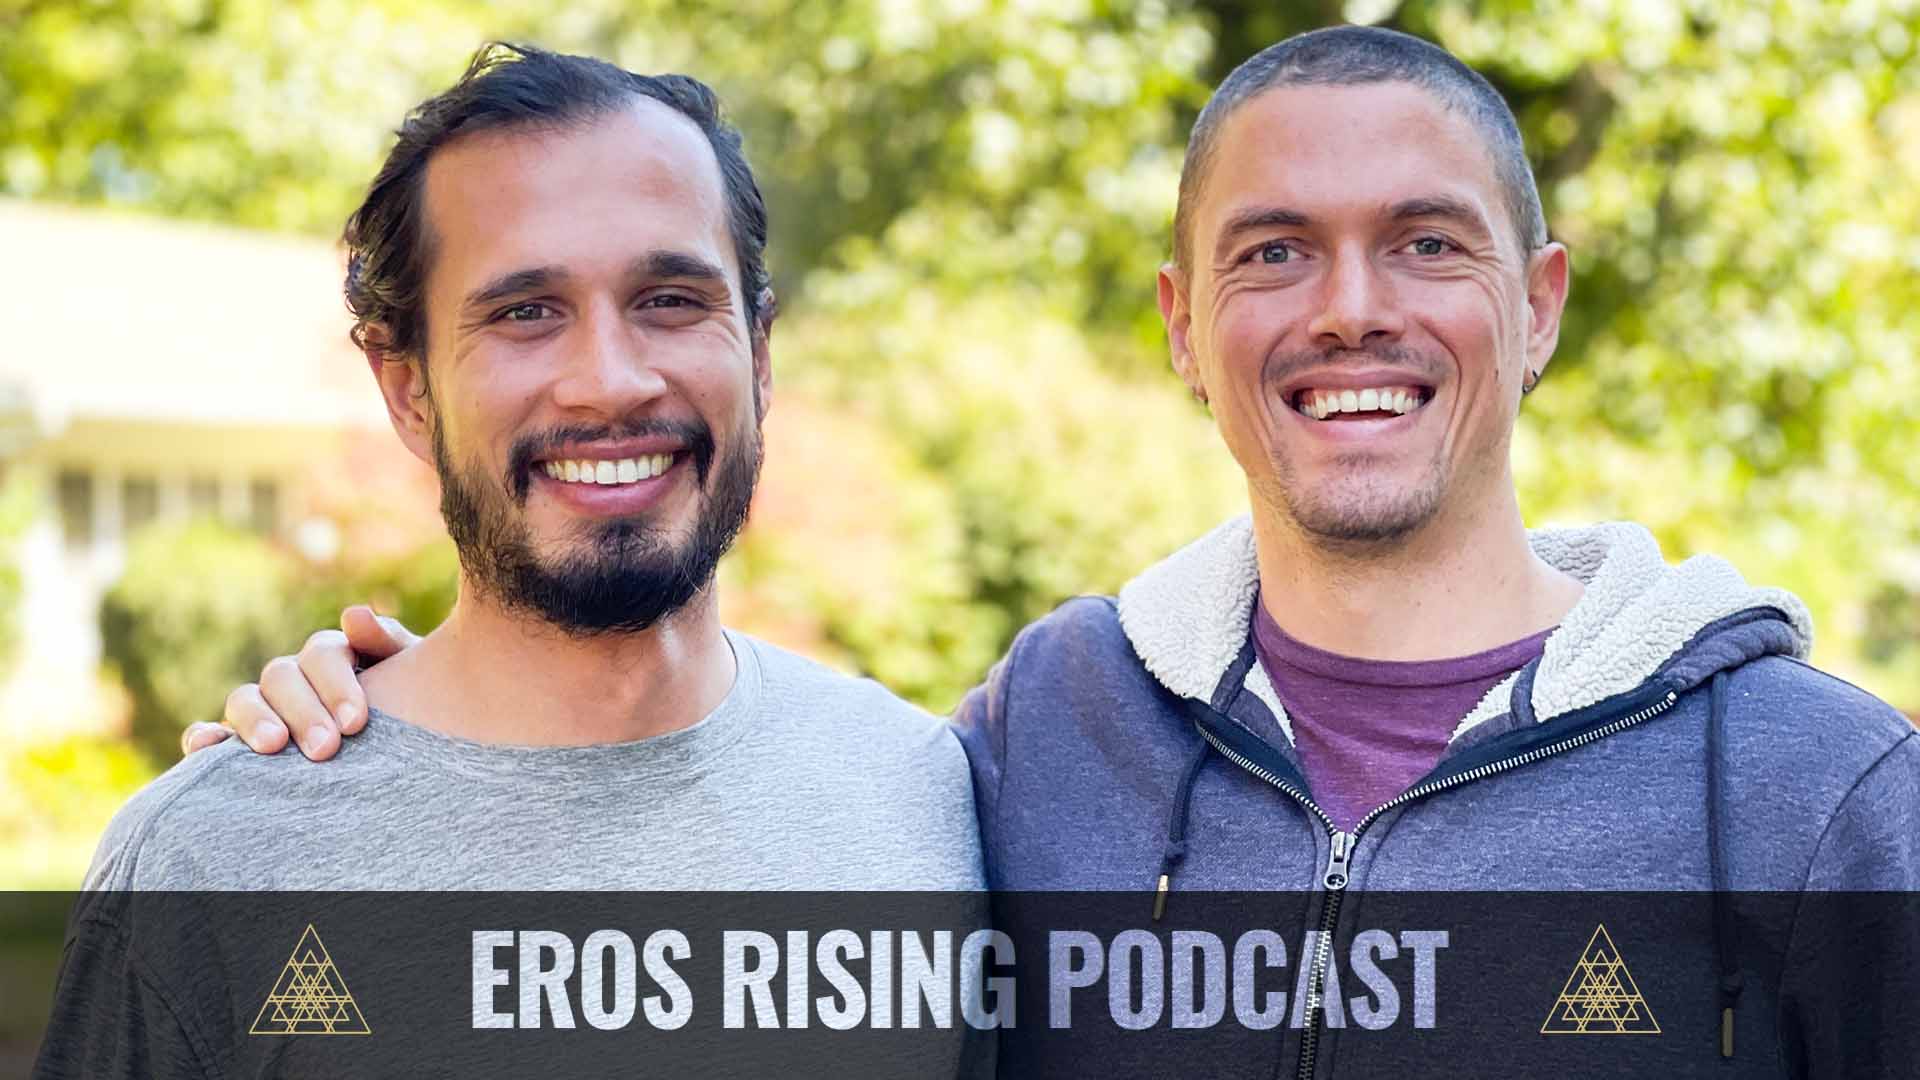 Portrait of Banks and Taylor with Eros Rising Podcast logo on top